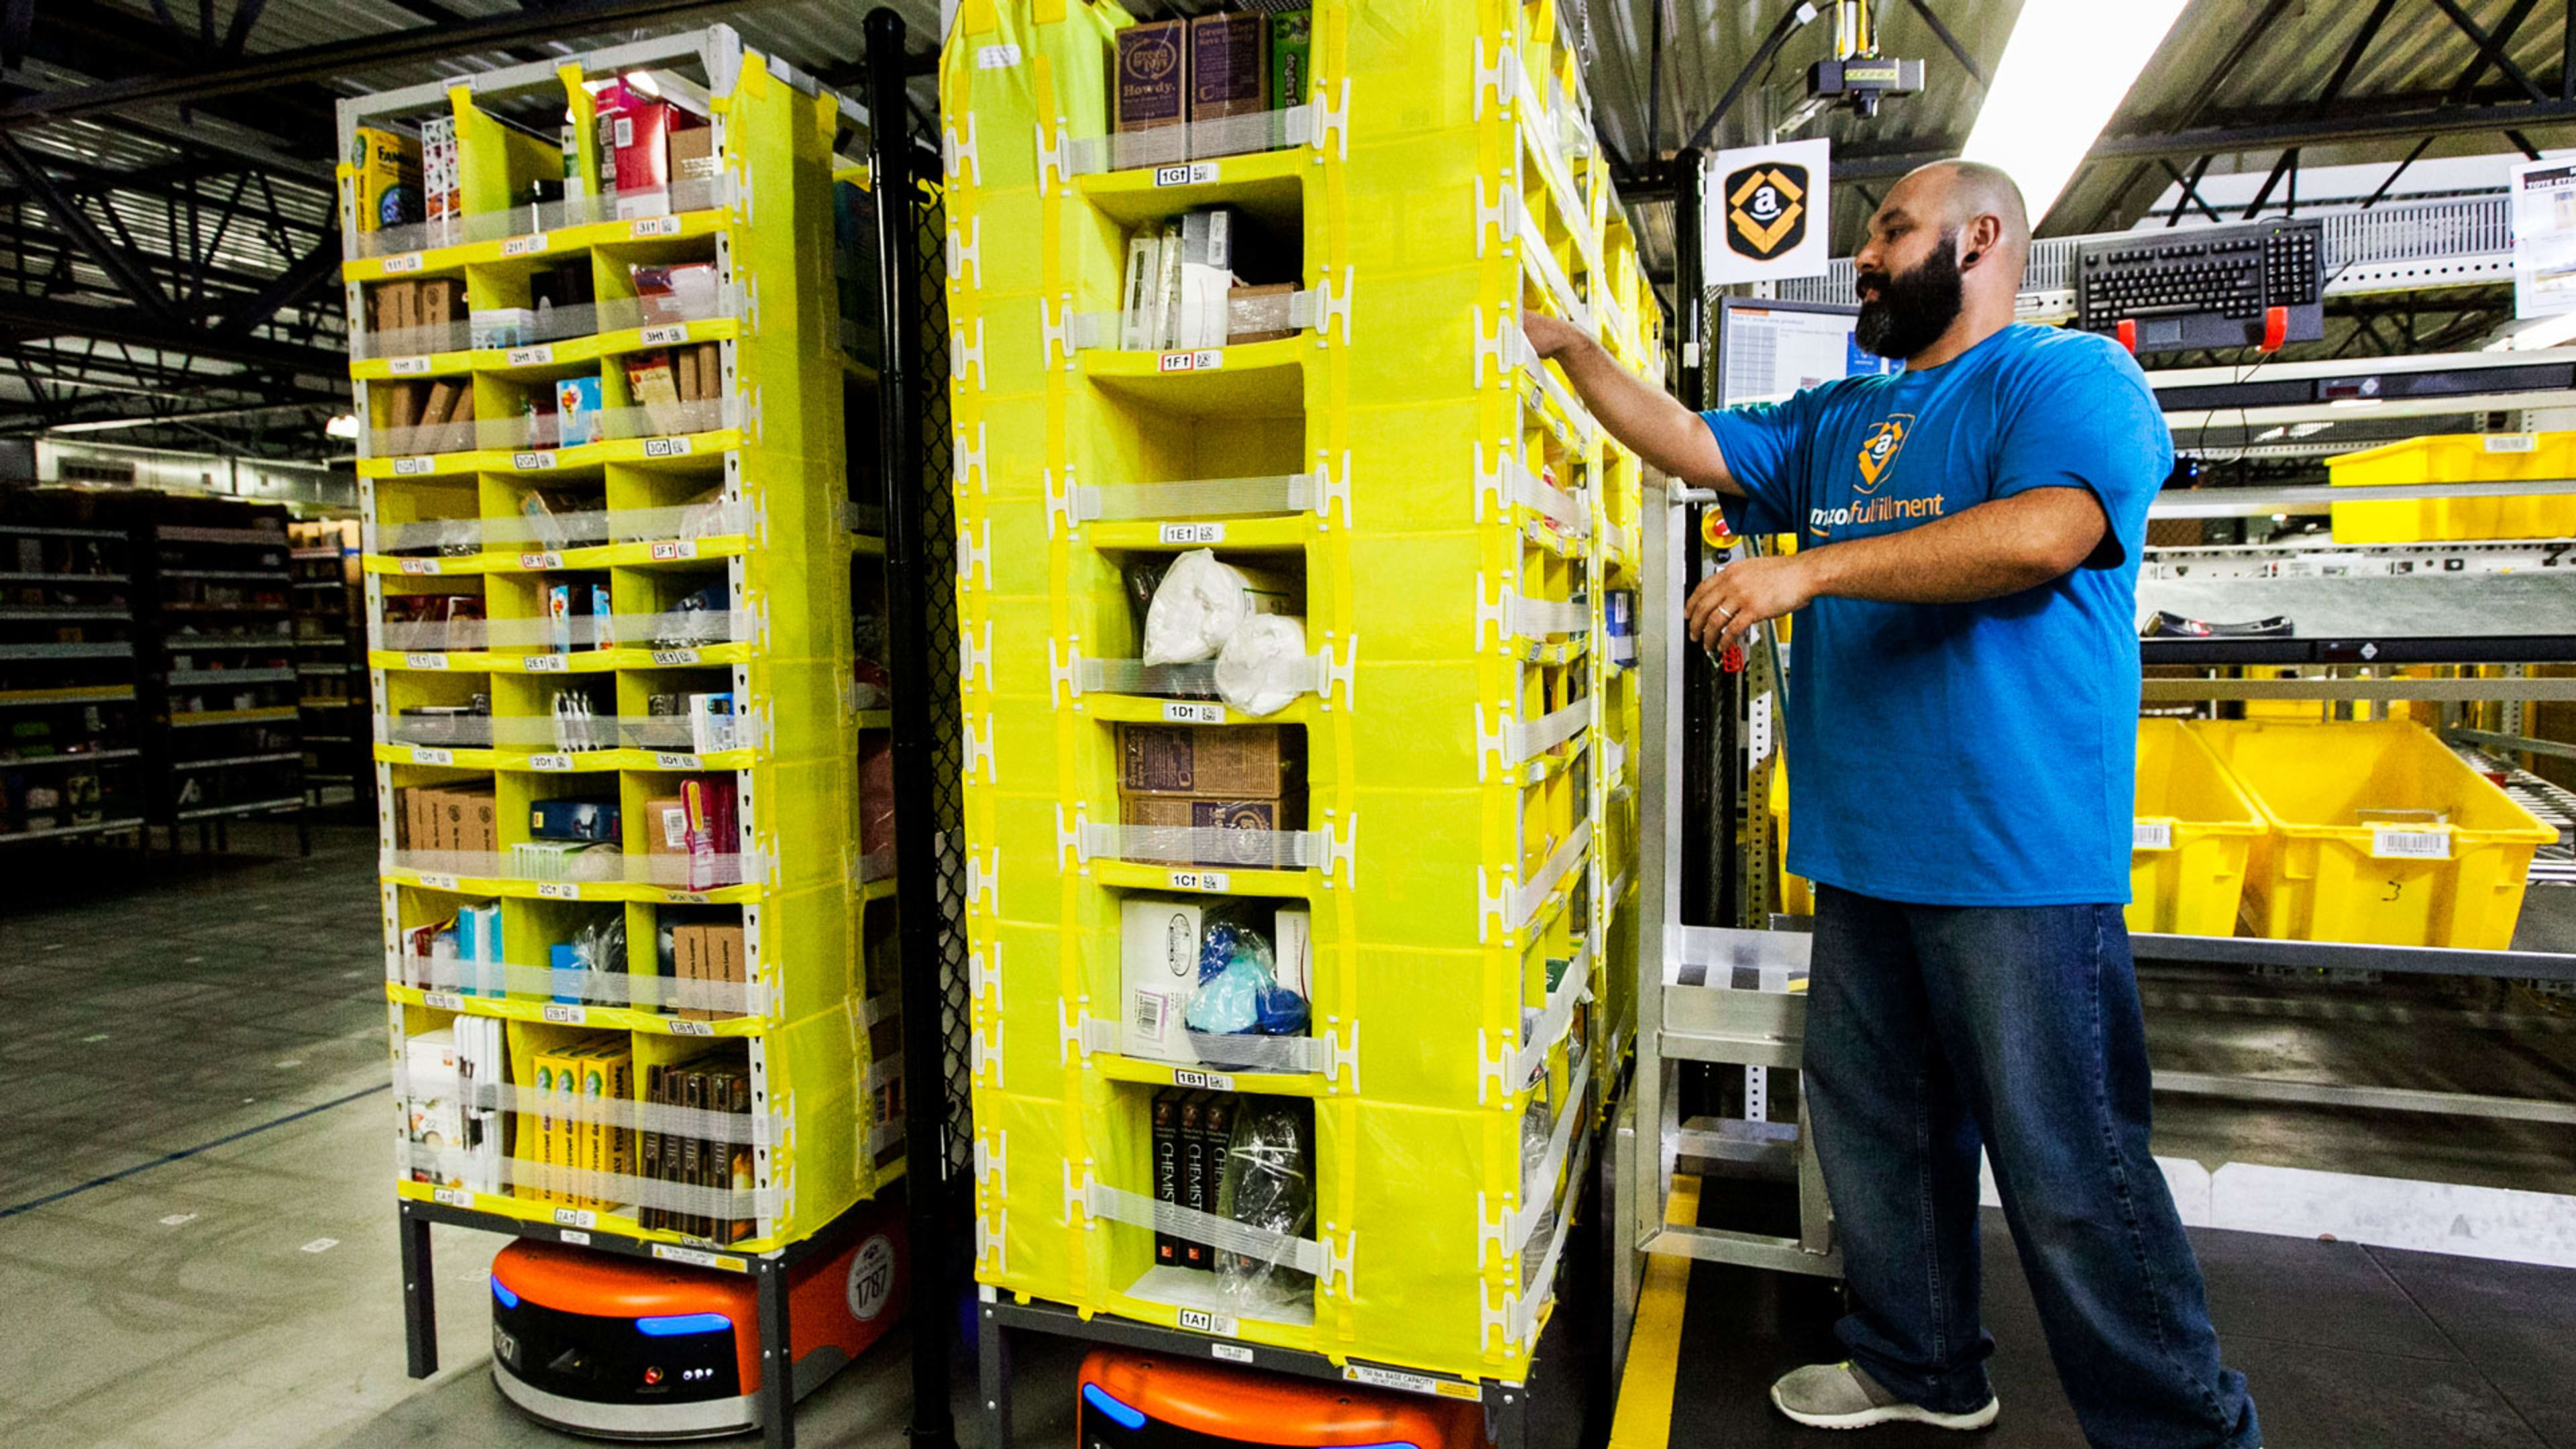 Amazon promises good human-robot working relationships at first NYC fulfillment center